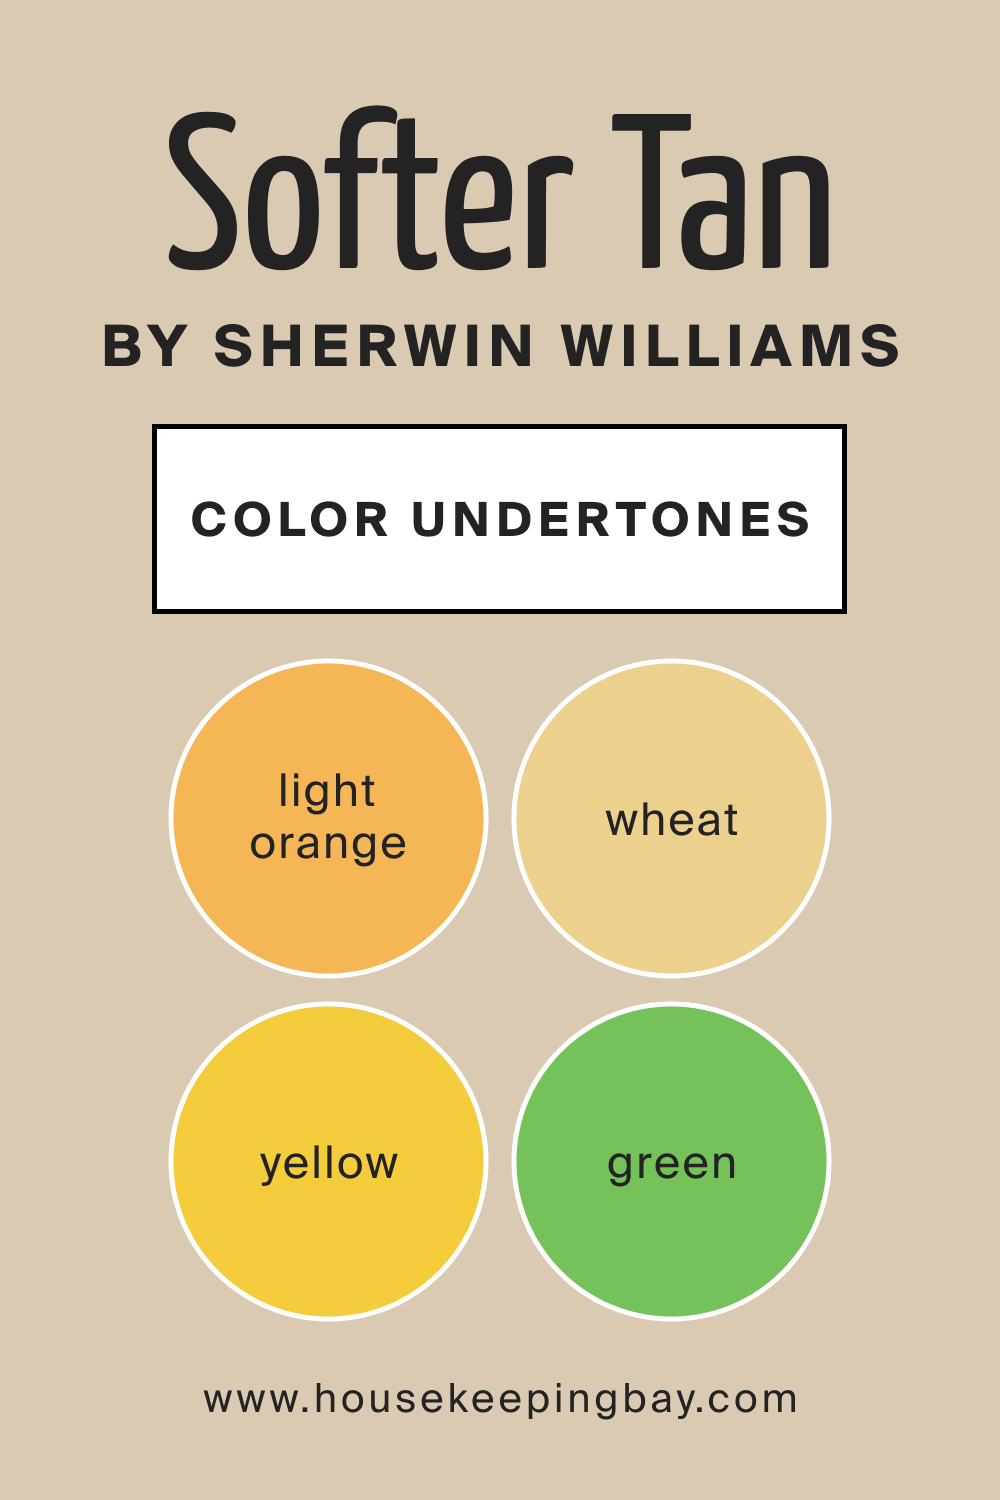 SW Softer Tan by Sherwin Williams Main Color Undertone